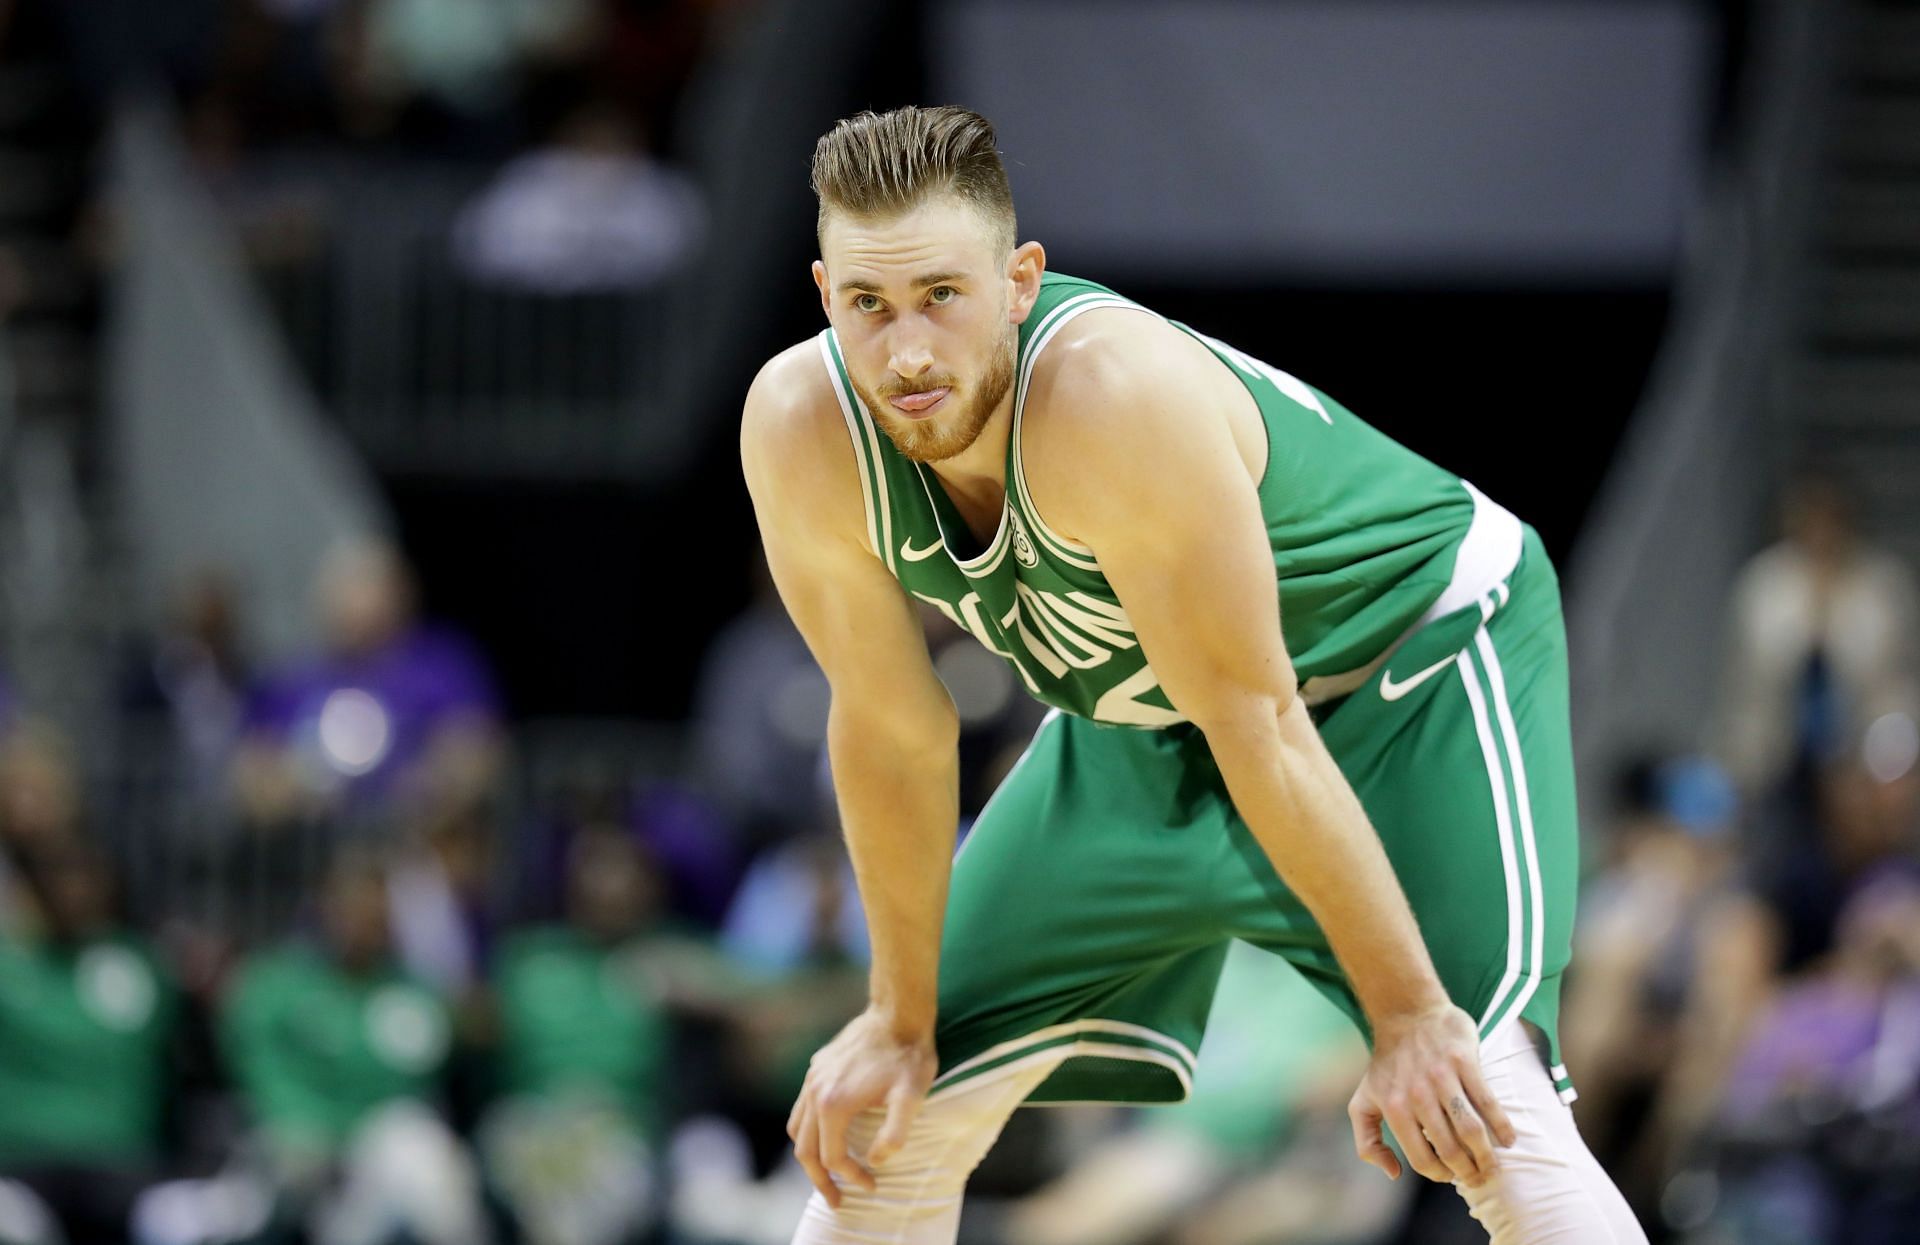 Hayward hasn't been the same since his injury (Image via Getty Images)